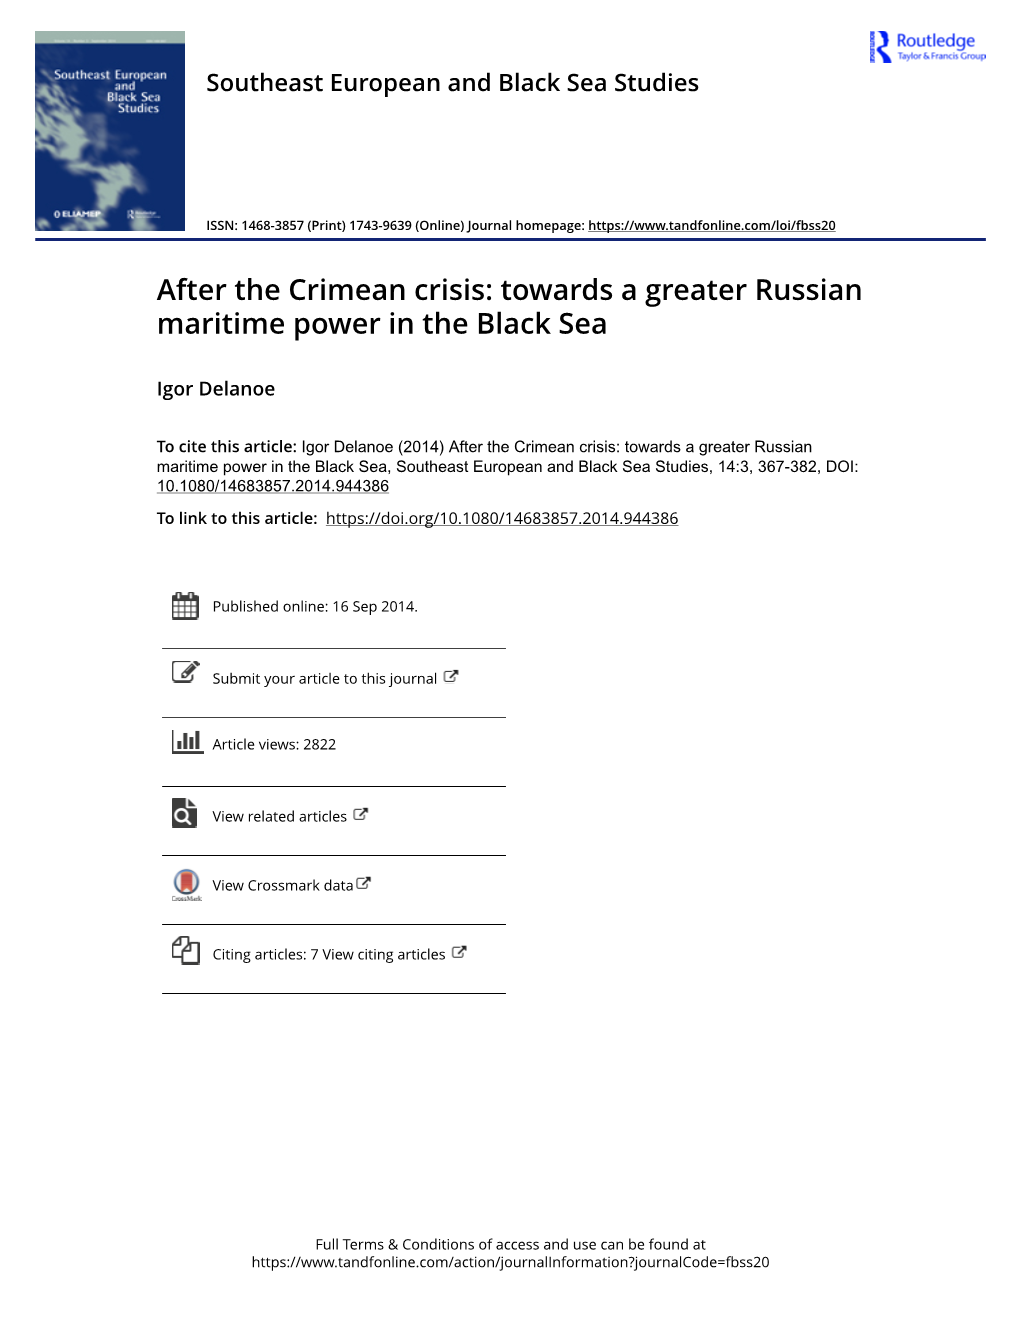 Towards a Greater Russian Maritime Power in the Black Sea